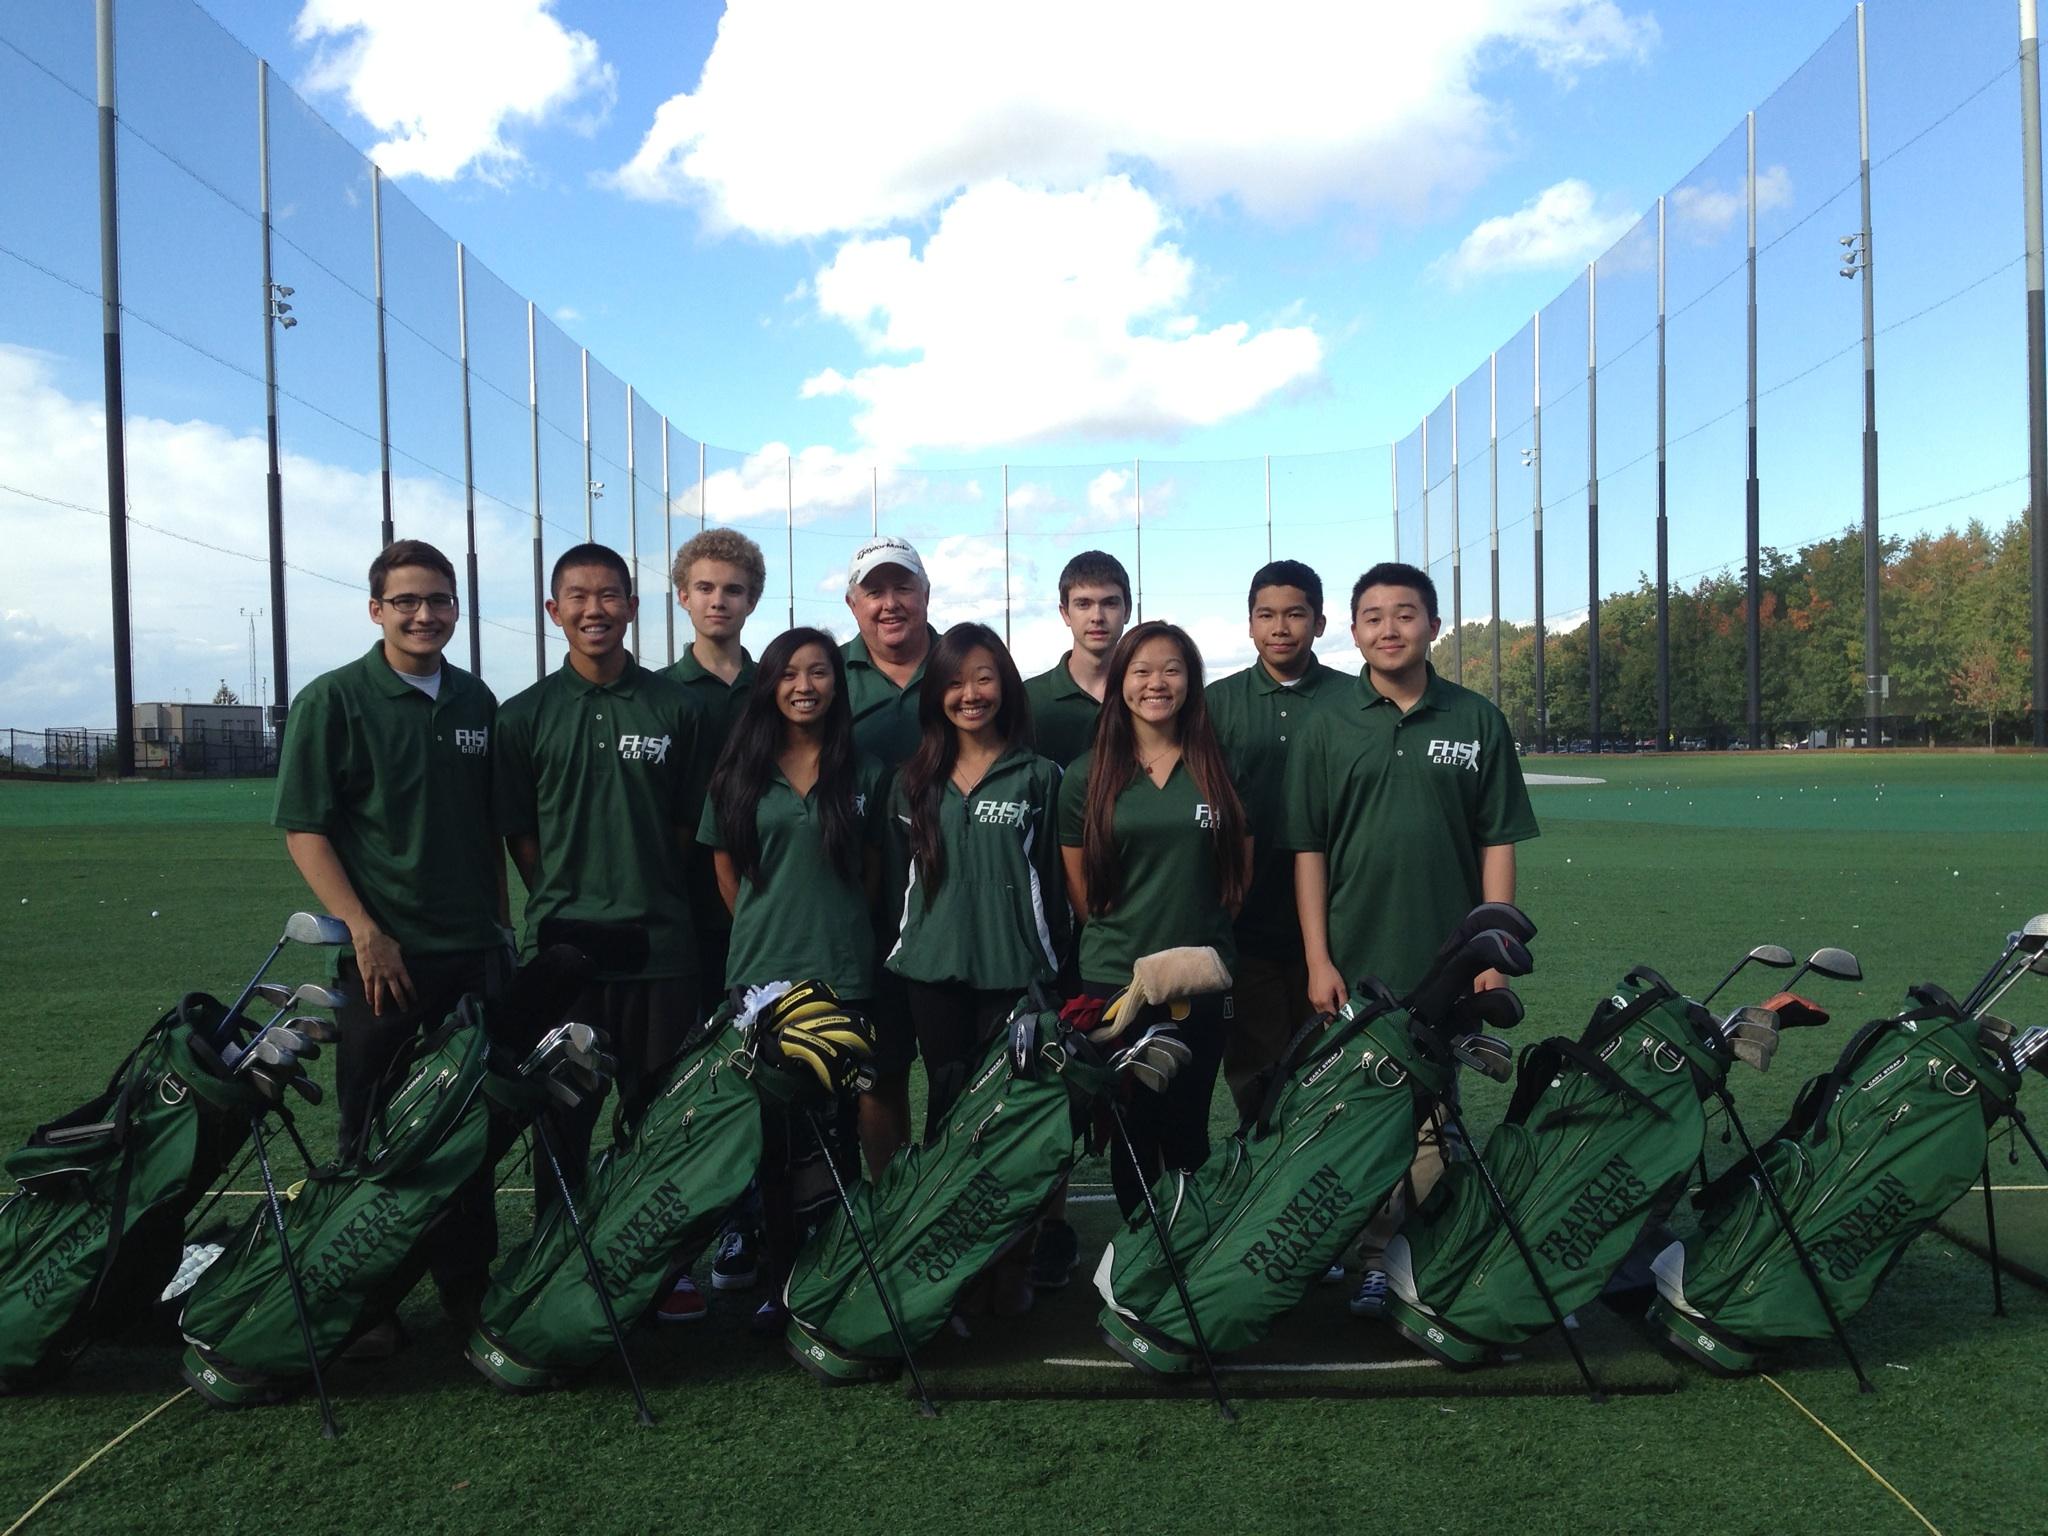 Franklin golf team and new bags 2014.jpg